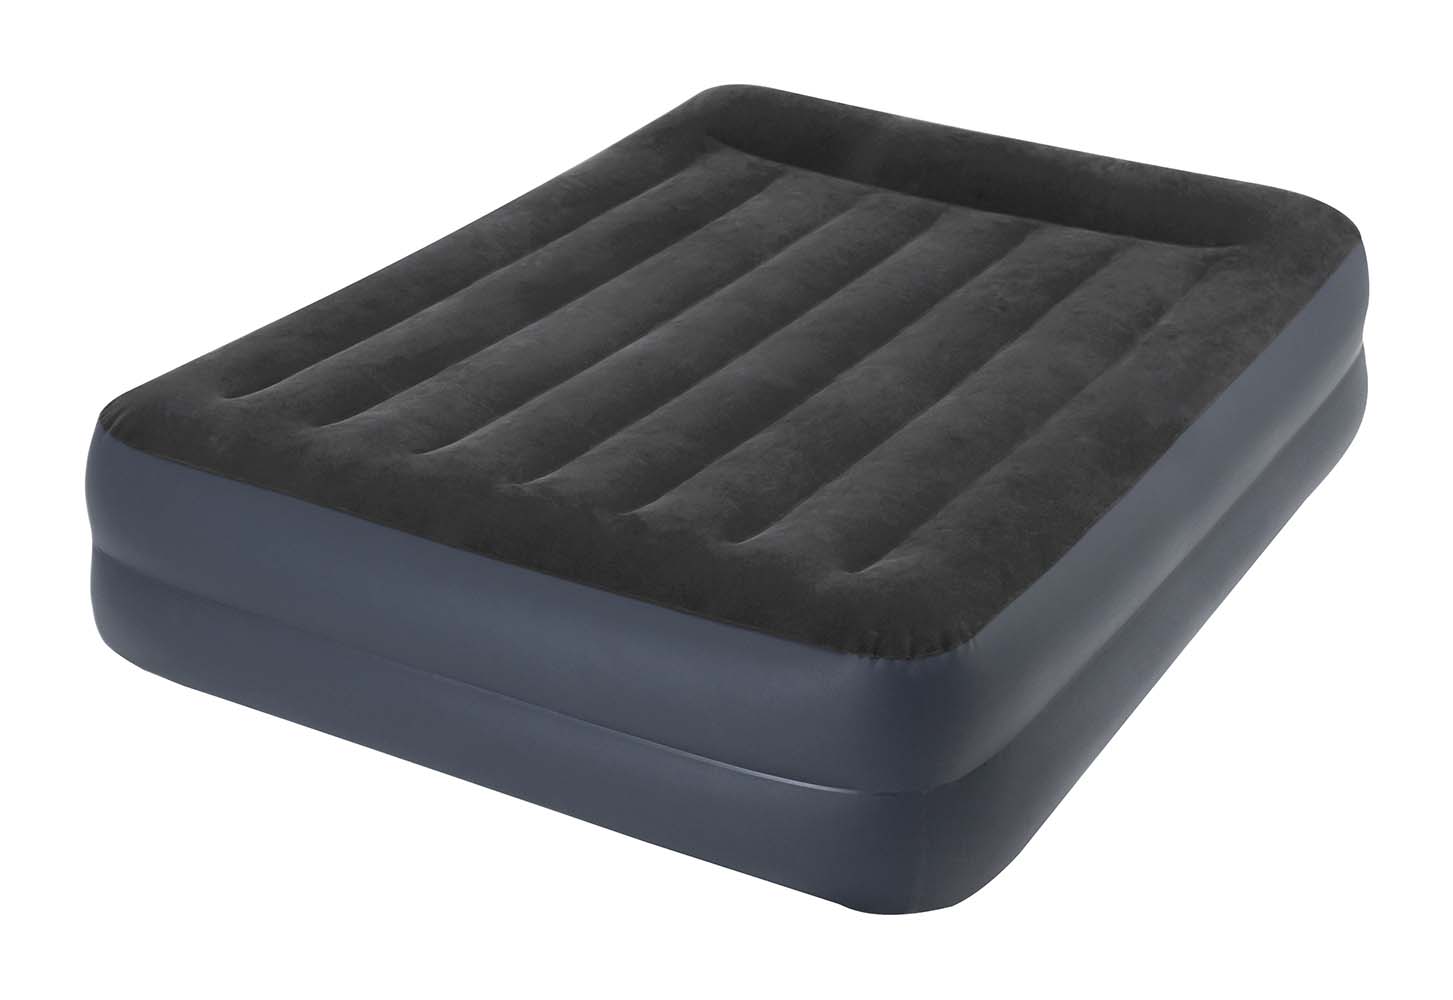 3264124 A luxurious double layer 2 person air mattress. This mattress is inflated in 3 minutes with the built-in electric pump. Because of the extremely soft and water repellent top layer, and integrated pillow this air mattress provides a high level of comfort. The mattress is also extra sturdy and strong because of the use of Dura-Beam® dividers. The dividers have been replaced by thousands of rock-solid polyester threads, so the dividers can no longer break. Comes in a handy carry bag.